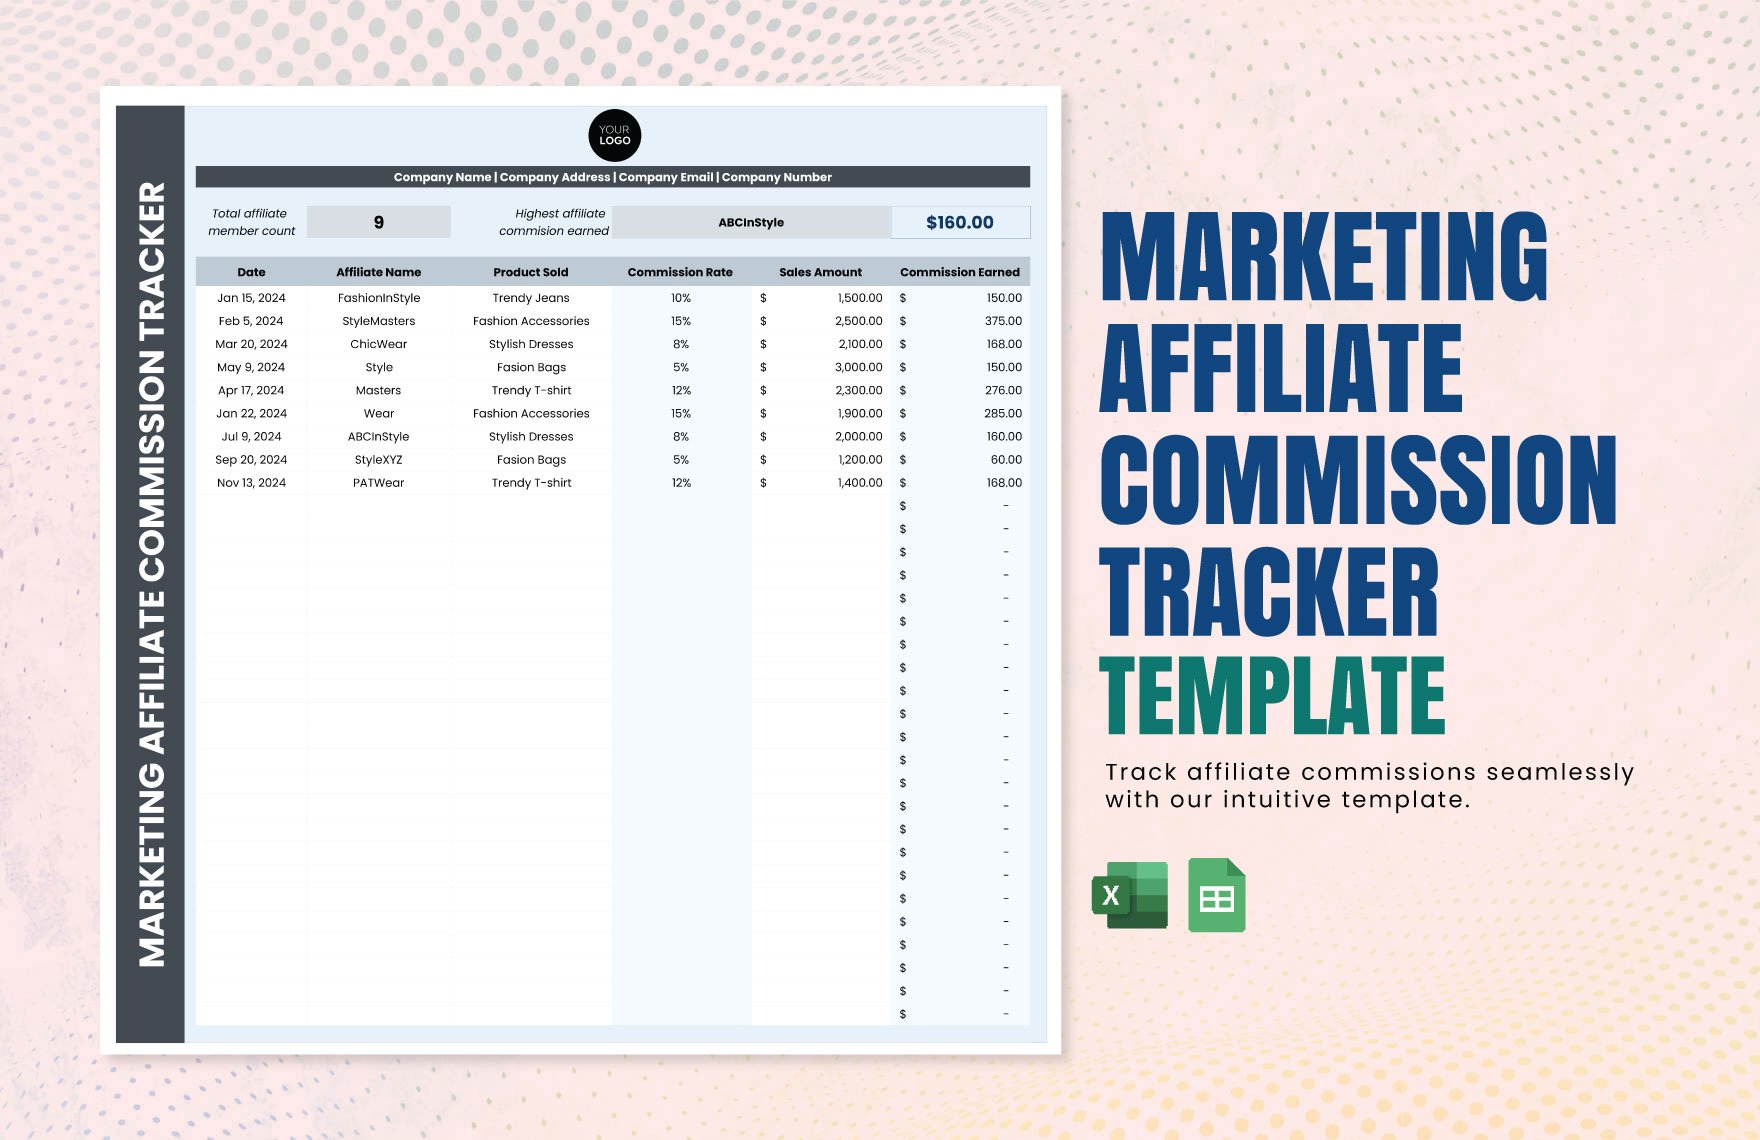 Marketing Affiliate Commission Tracker Template